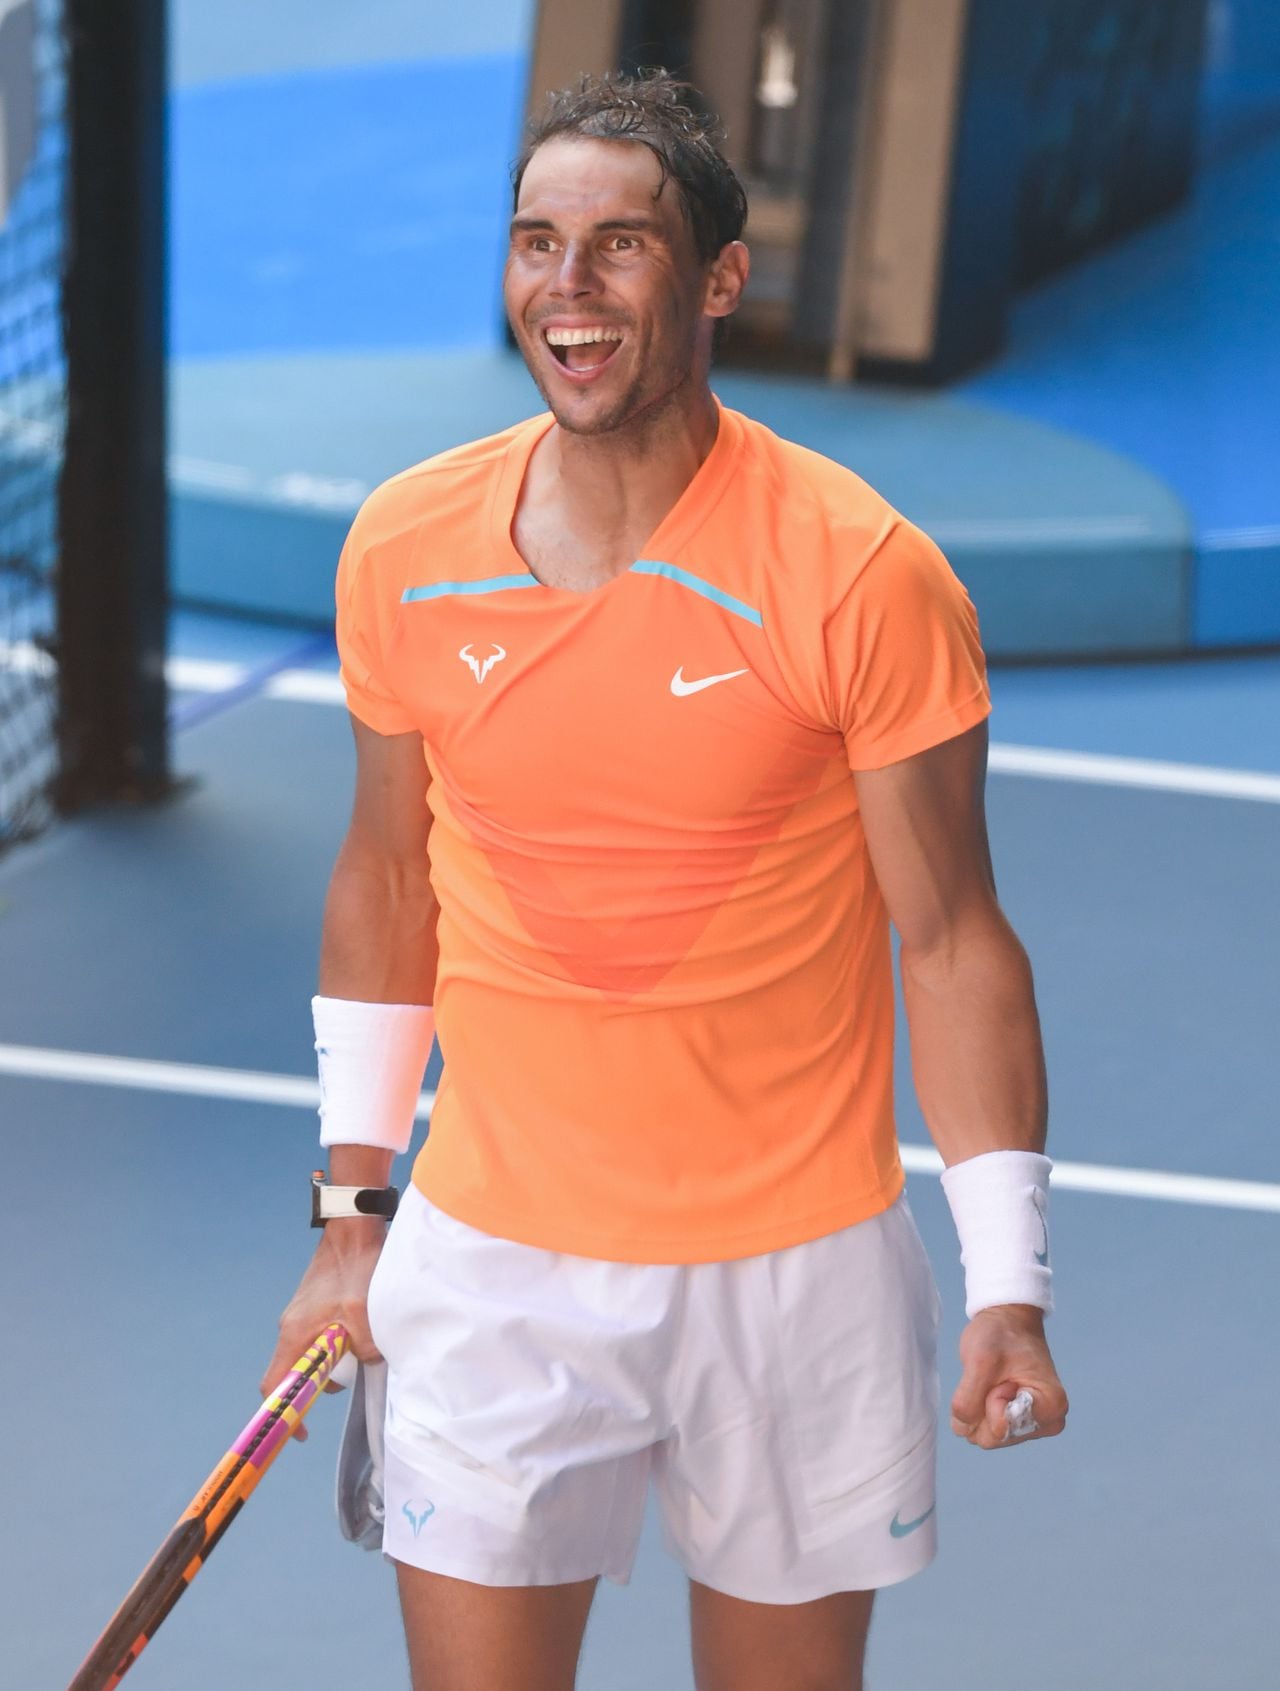 MELBOURNE, AUSTRALIA - JANUARY 16: Rafael Nadal of Spain celebrates match point in his round one singles match against Jack Draper of Great Britain during day one of the 2023 Australian Open at Melbourne Park on January 16, 2023 in Melbourne, Australia.  (Photo by James D. Morgan/Getty Images)